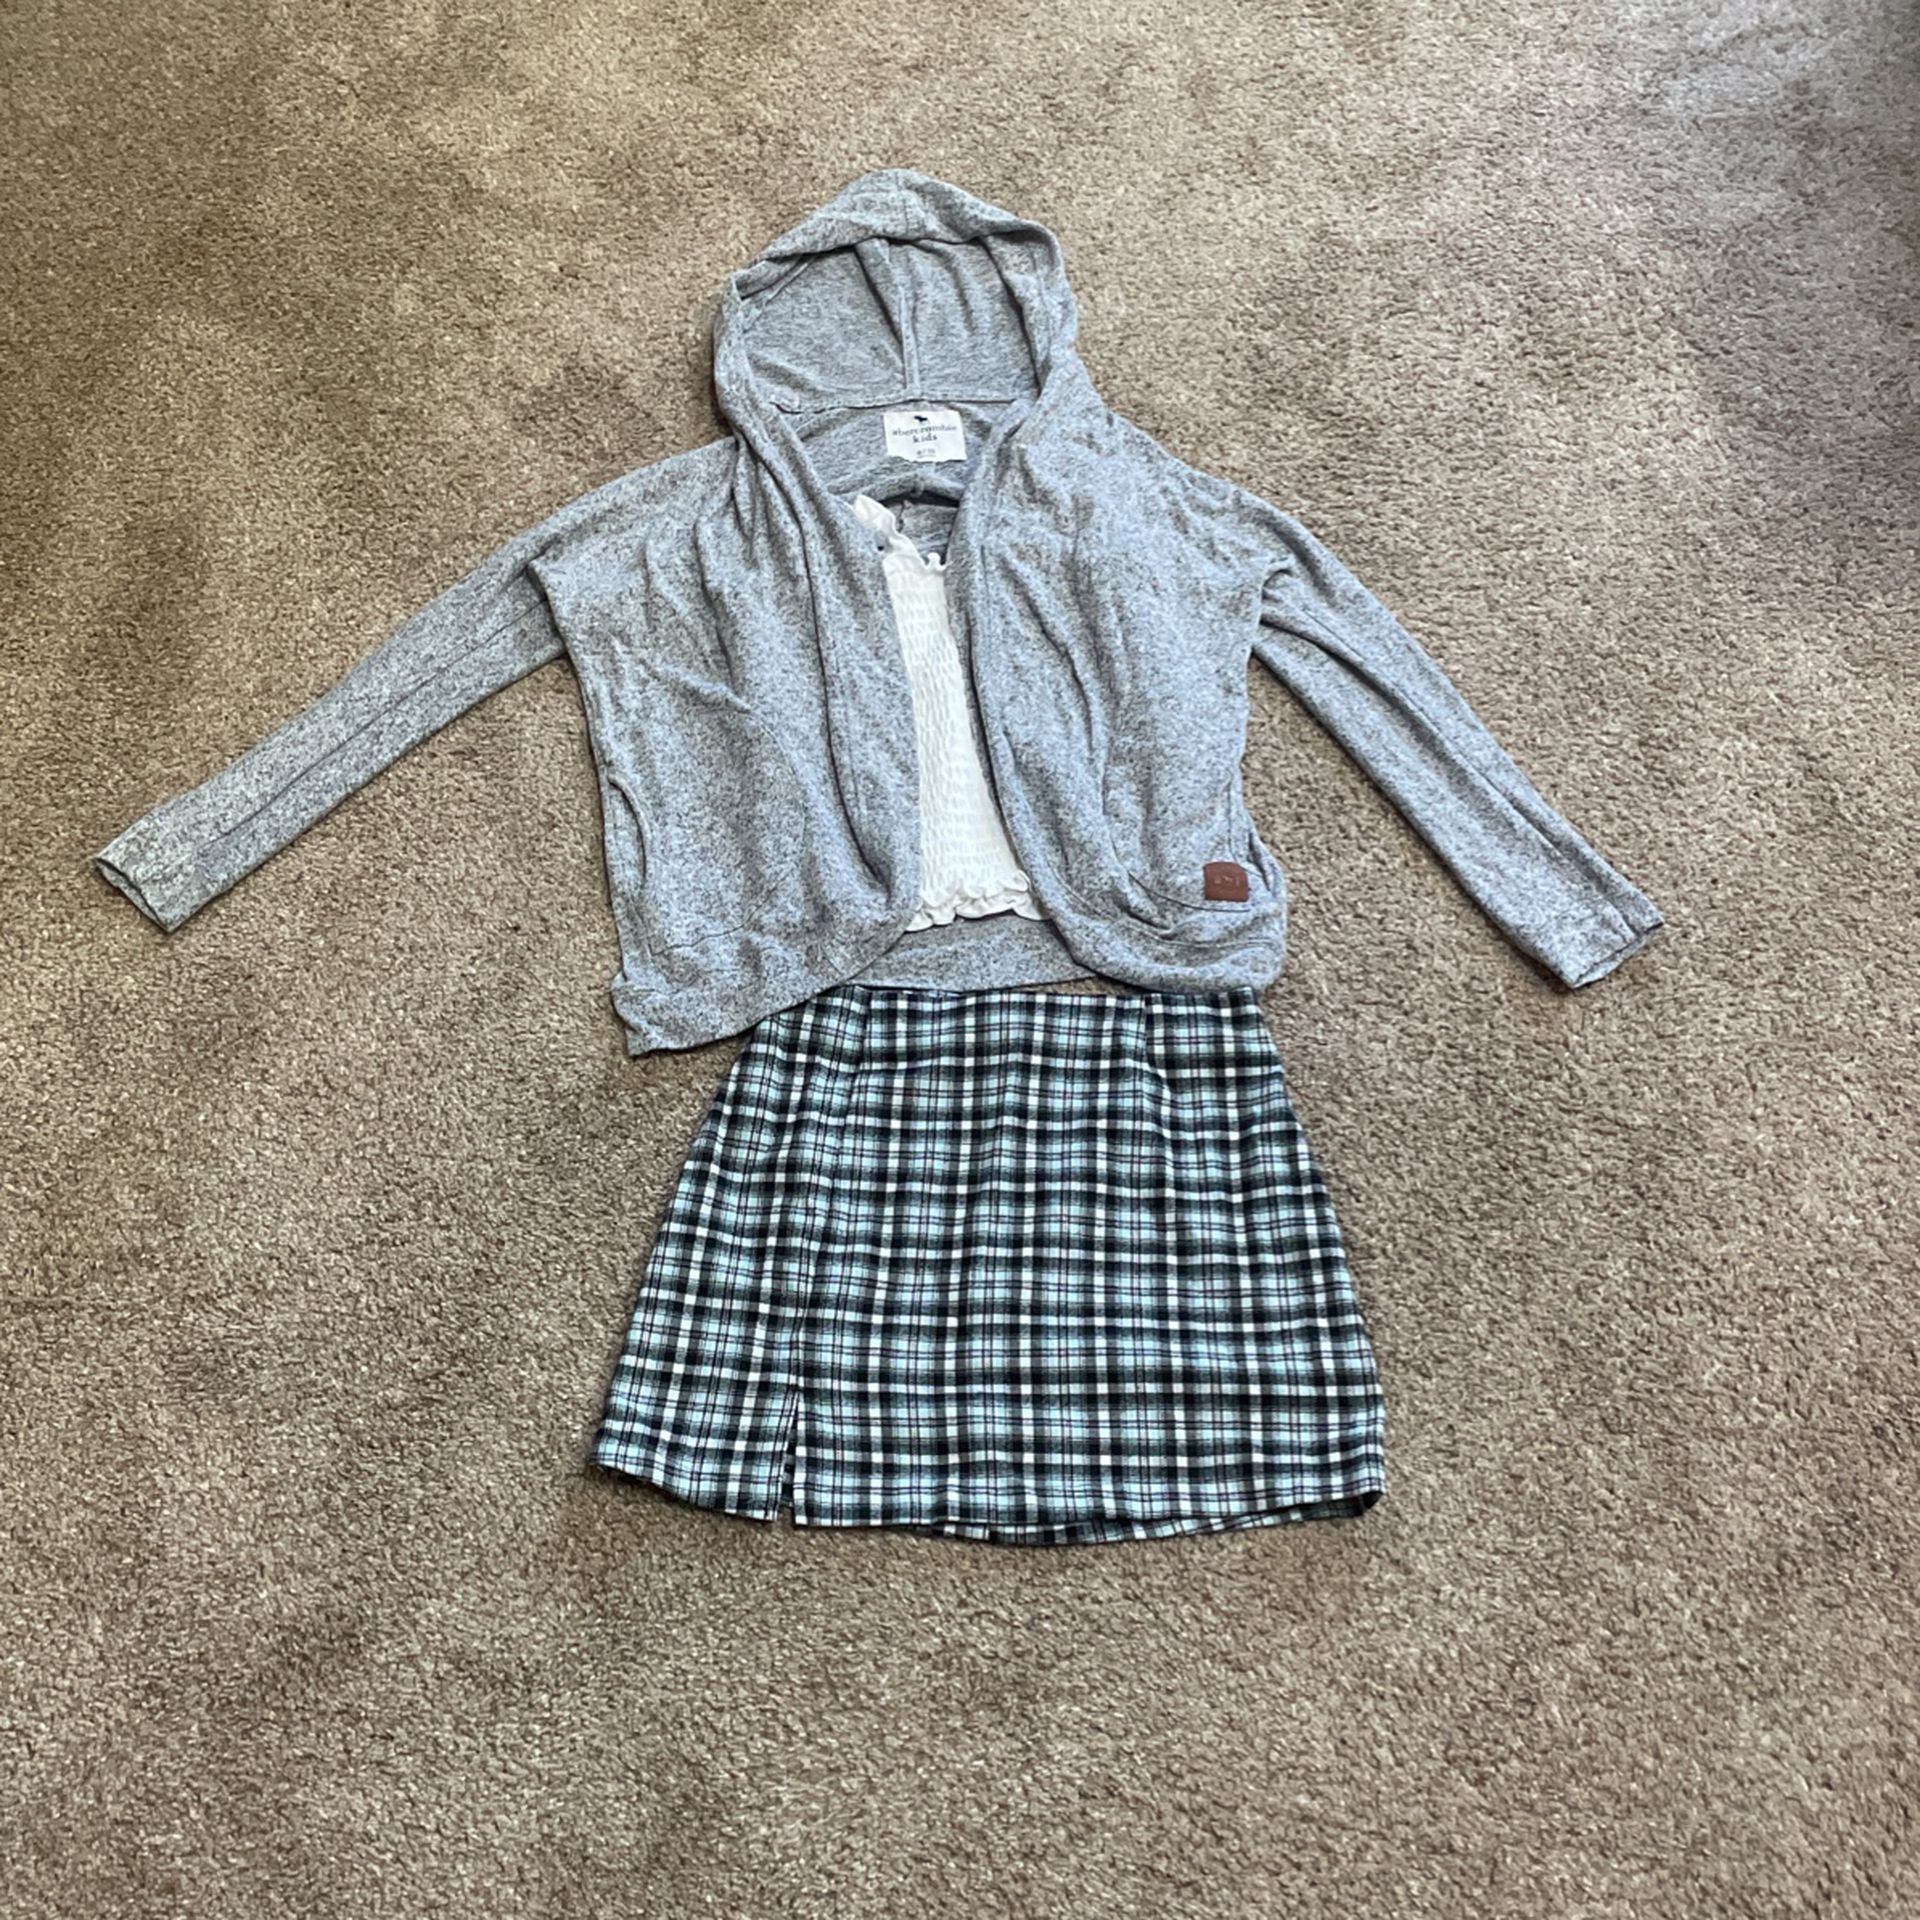 Girls Large outfit 